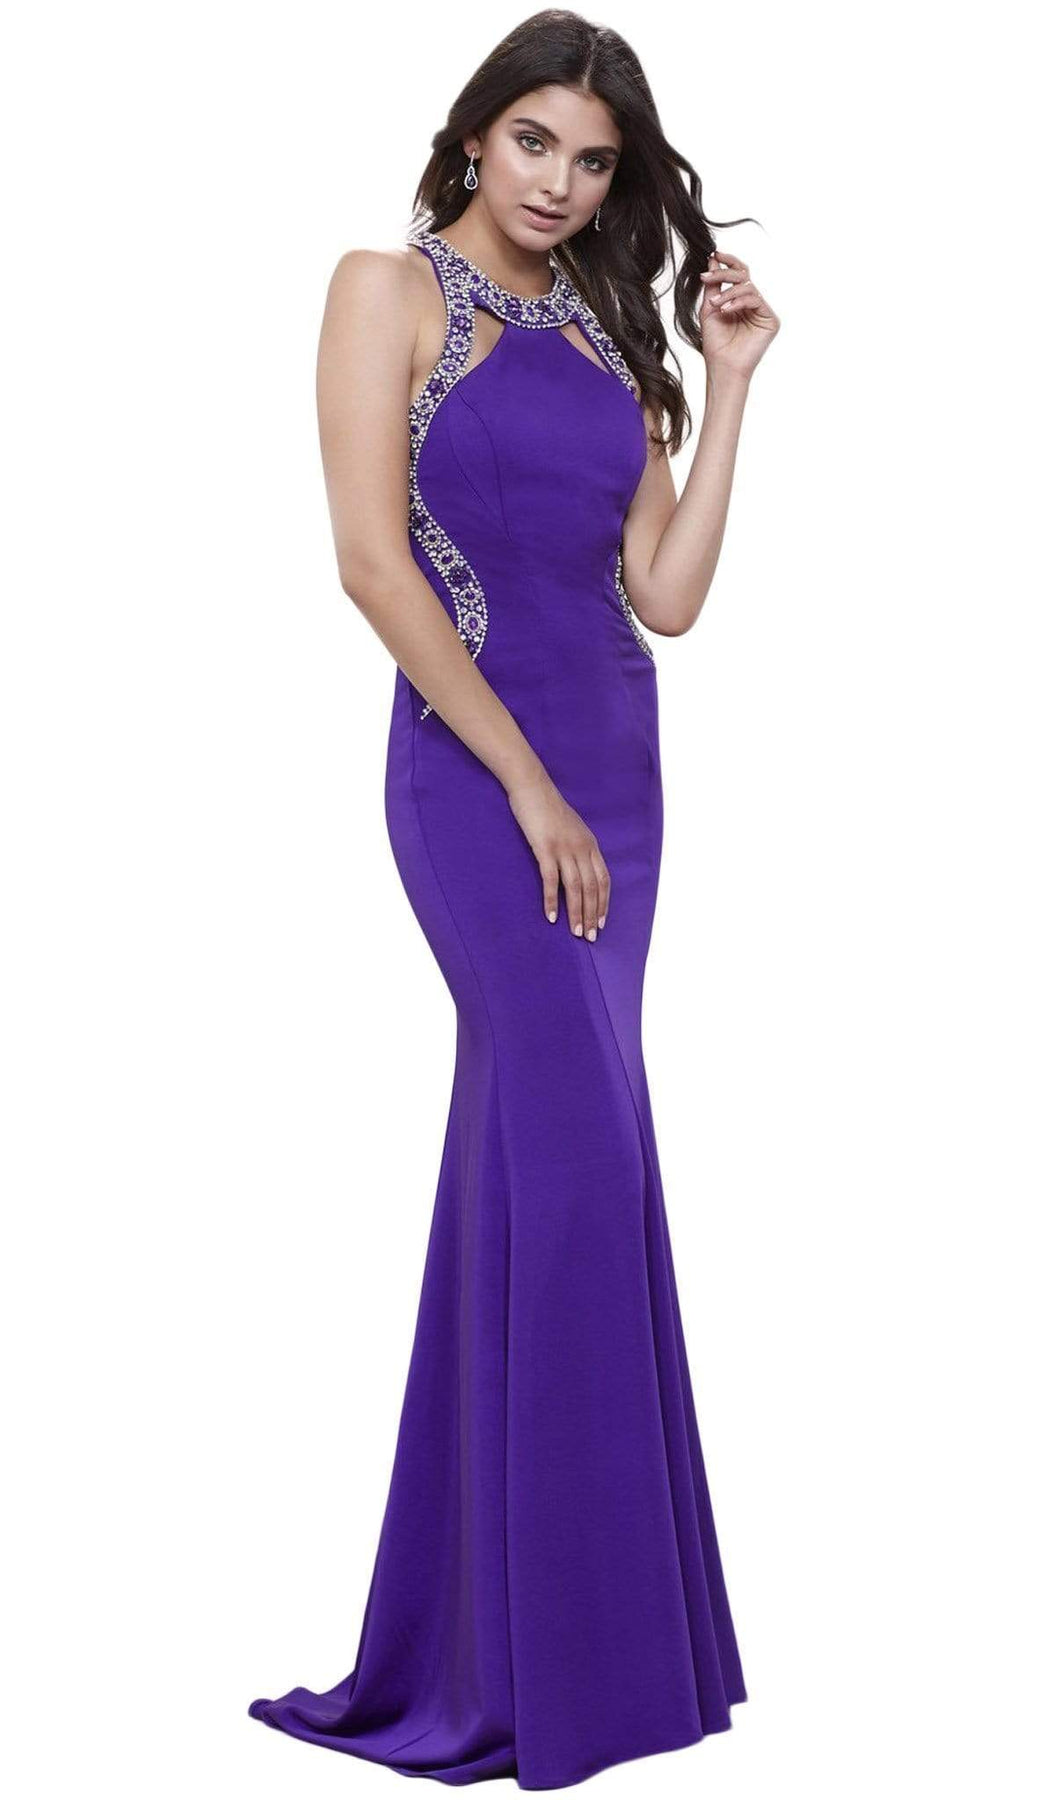 Nox Anabel - 8294 Bedazzled Halter Neck Long Trumpet Dress Special Occasion Dress XS / Purple